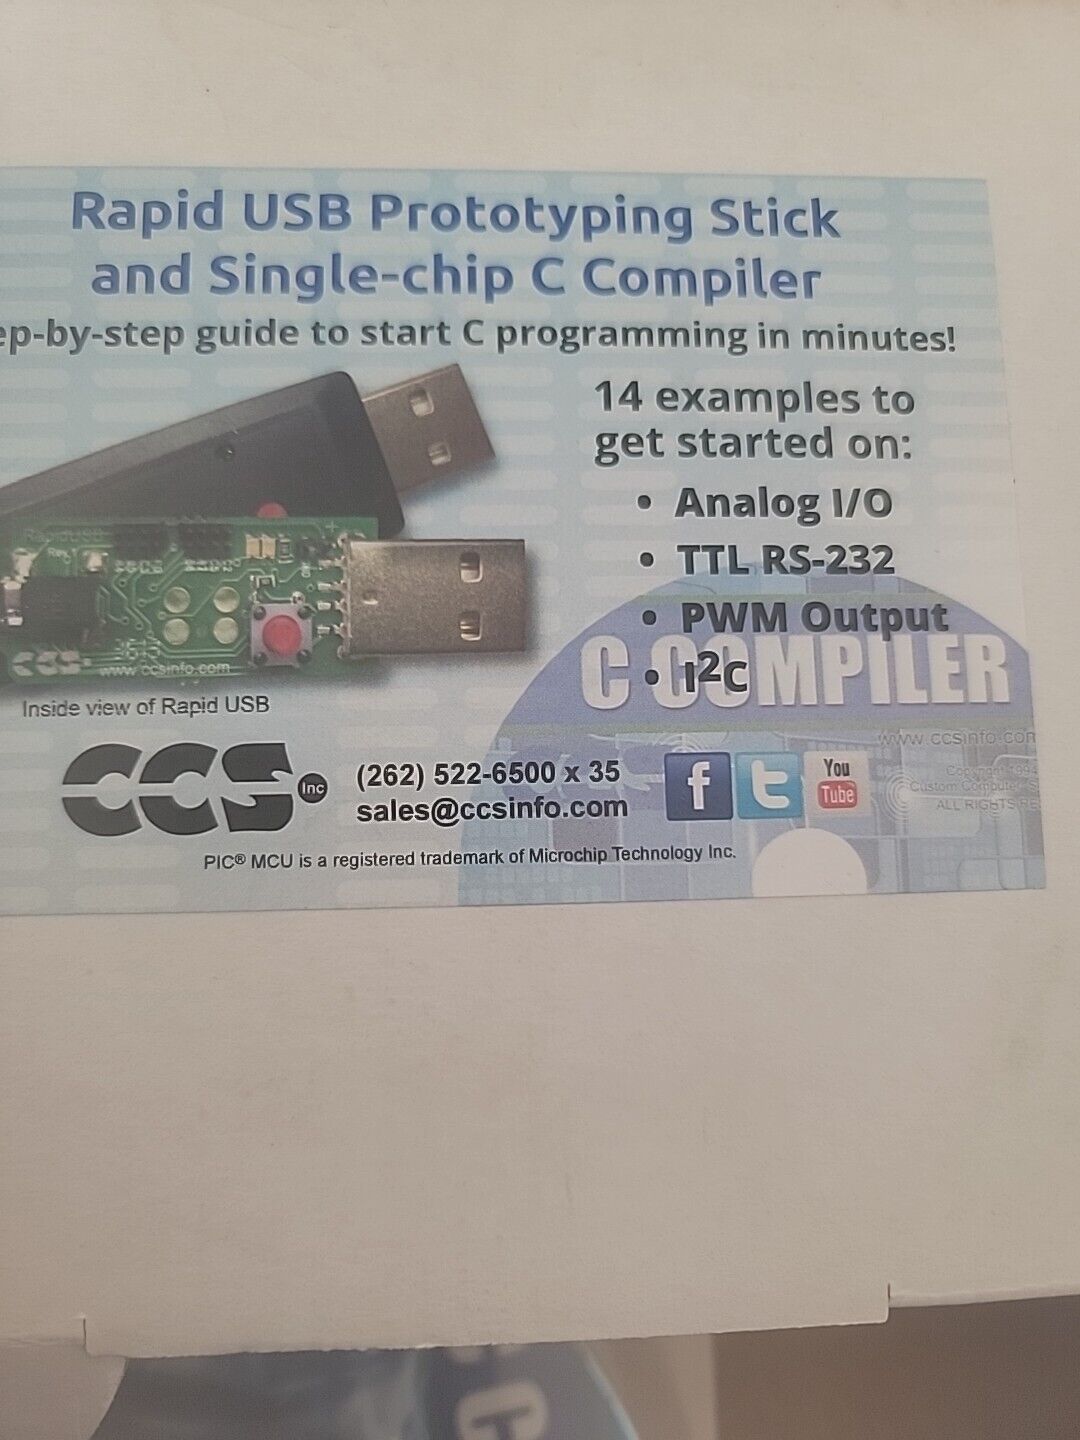 New Rapid USB Prototyping Stick And Complier With Disc Analog TTL Rs-232 PWM Out